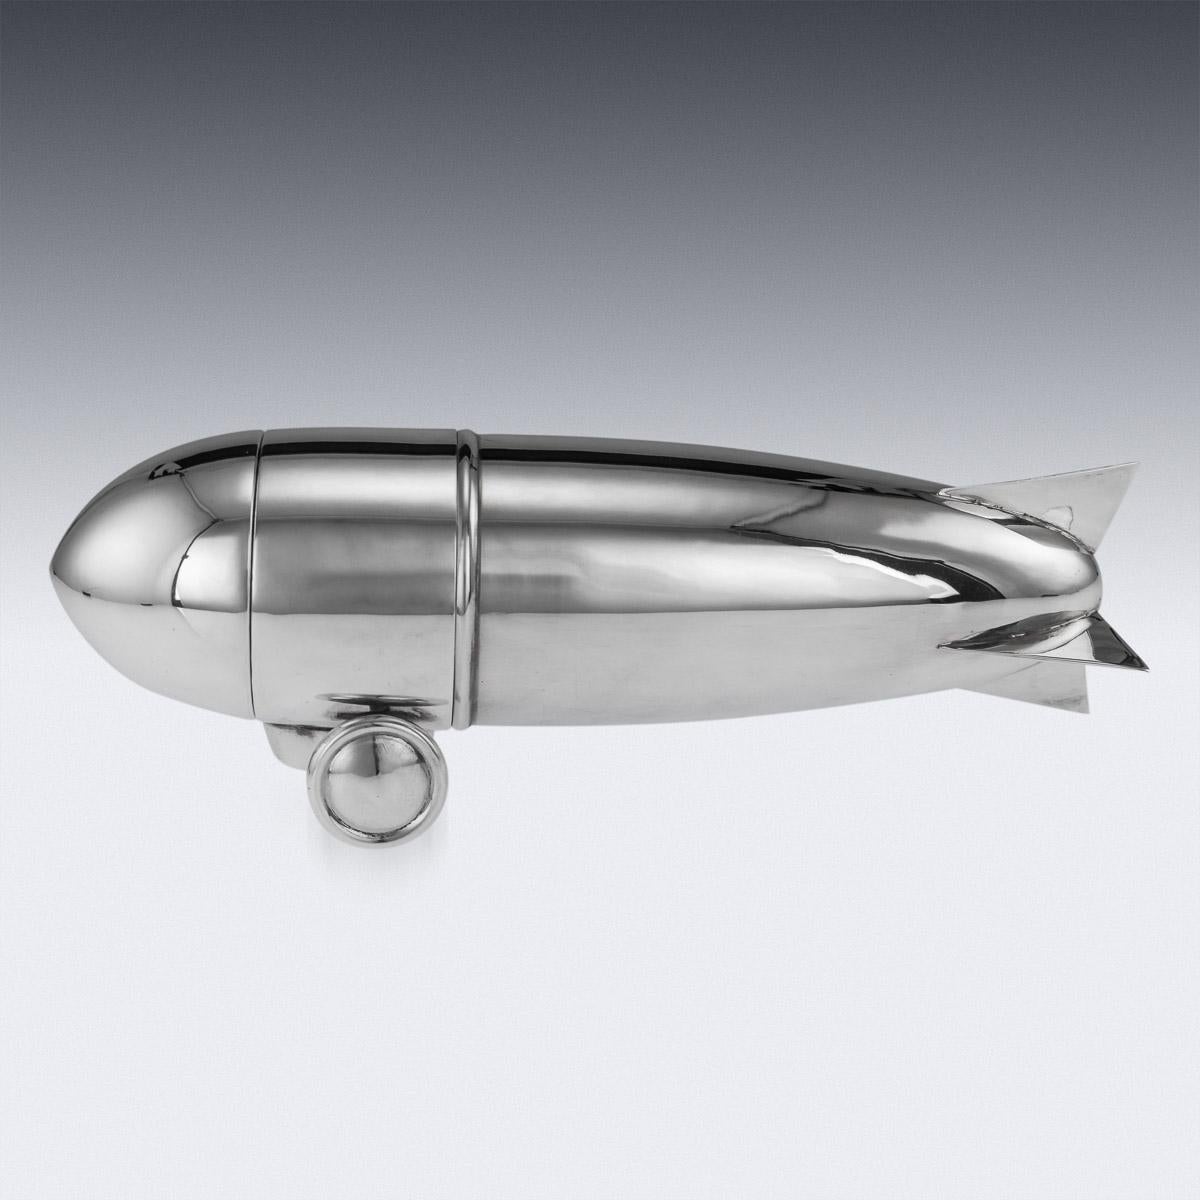 Superb 20th Century Art Deco style silver plated ‘Zeppelin’ shaped cocktail shaker, of large proportions, the body acting as a shaker, with a detachable strainer.

This cocktail shaker is in fabulous condition and is a must for any collector or just